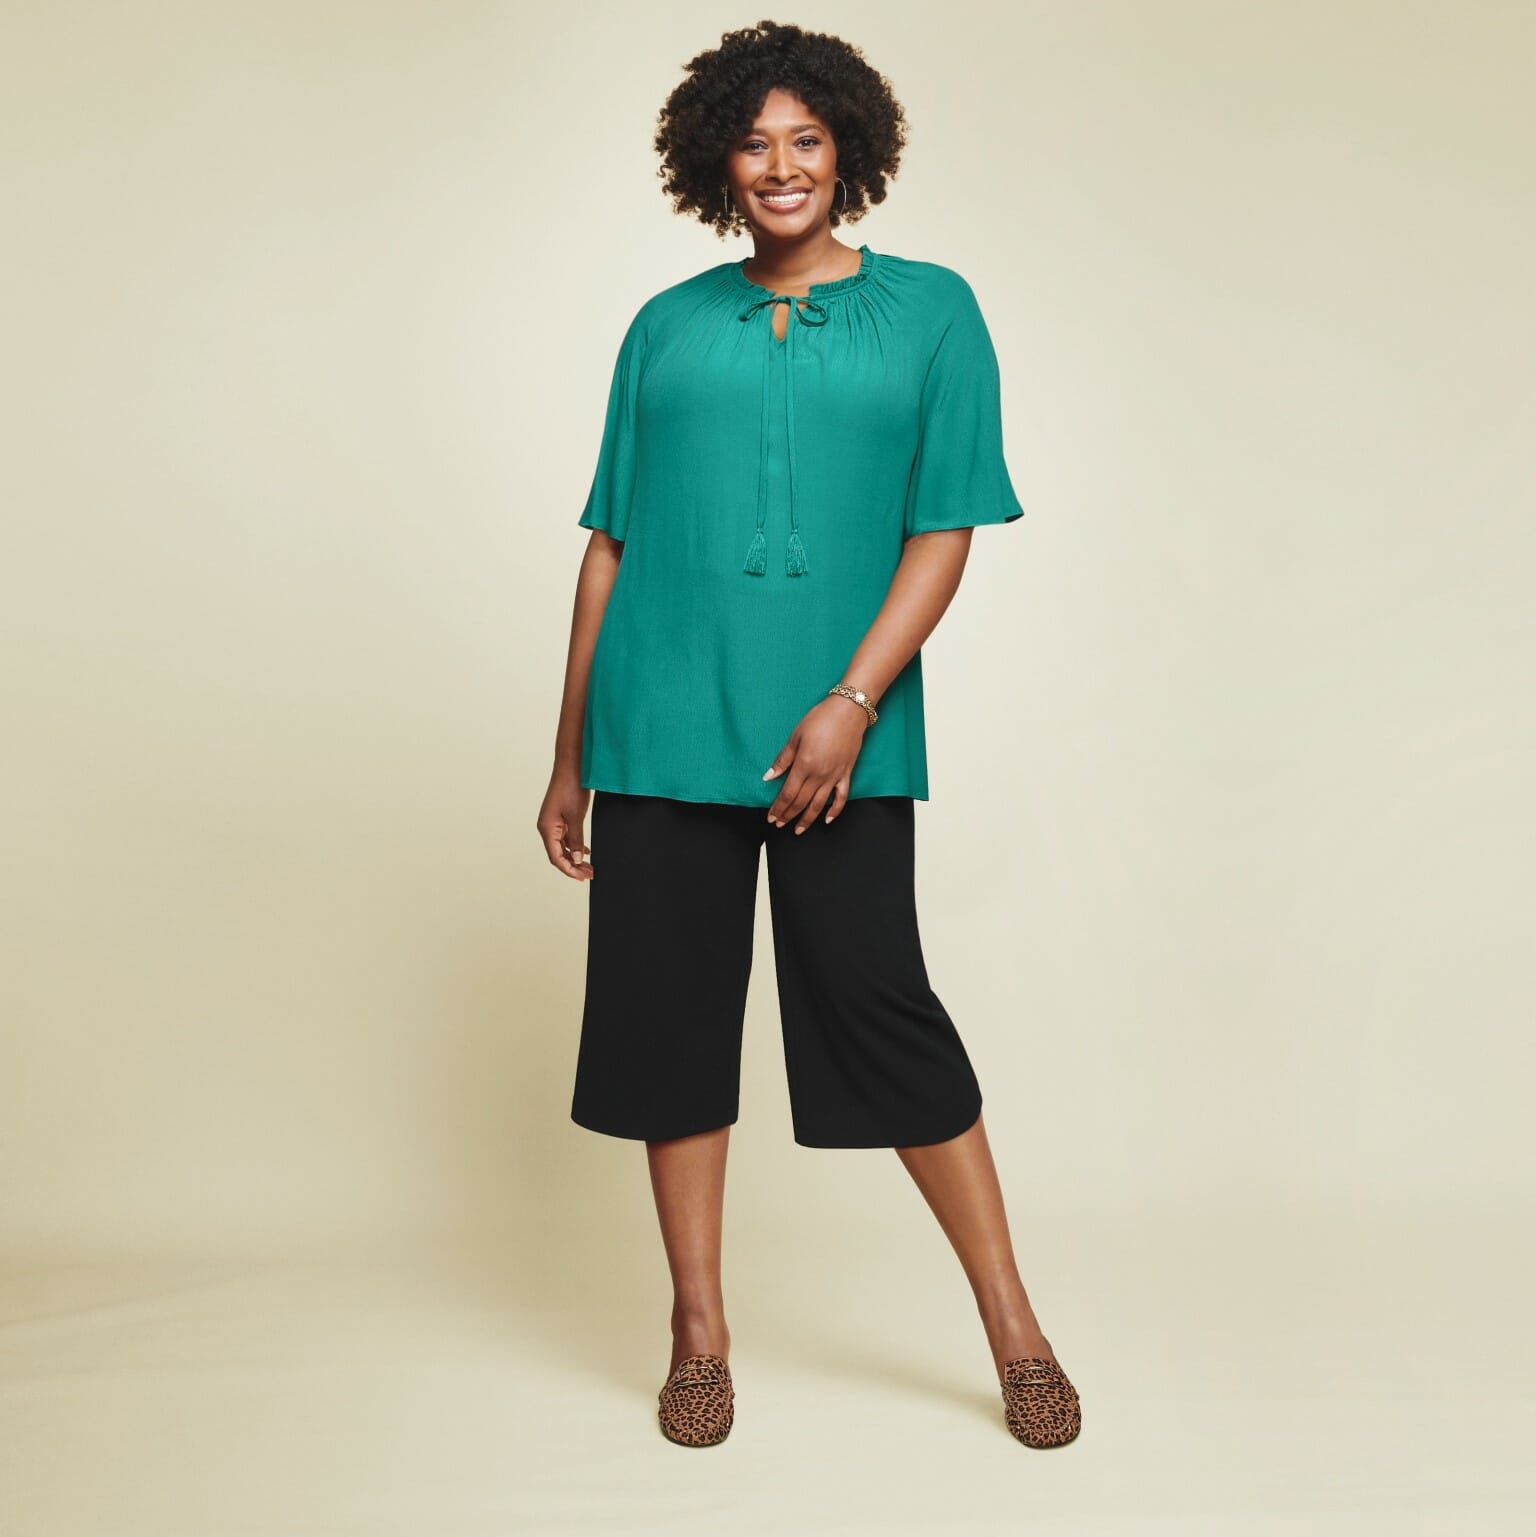 plus size model wearing a blue top with black capris.